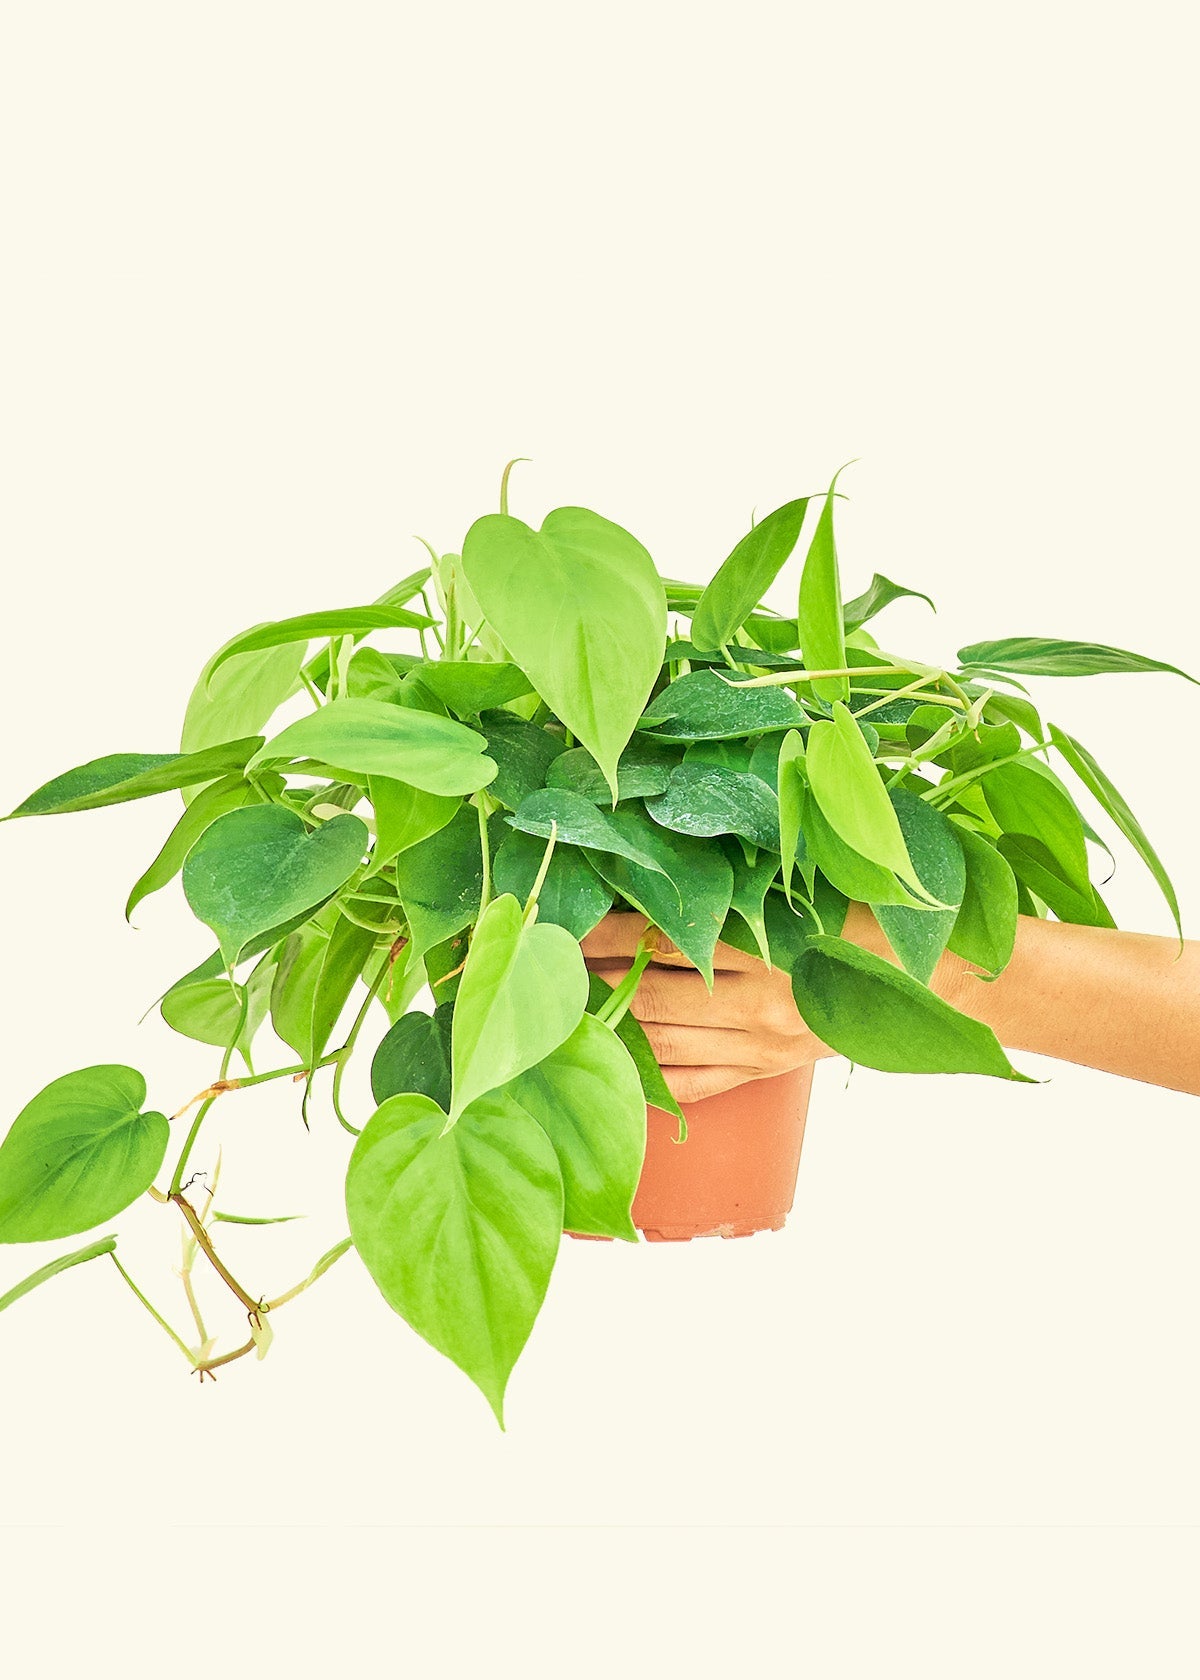 Medium Sweetheart Philodendron (Philodendron cordatum)